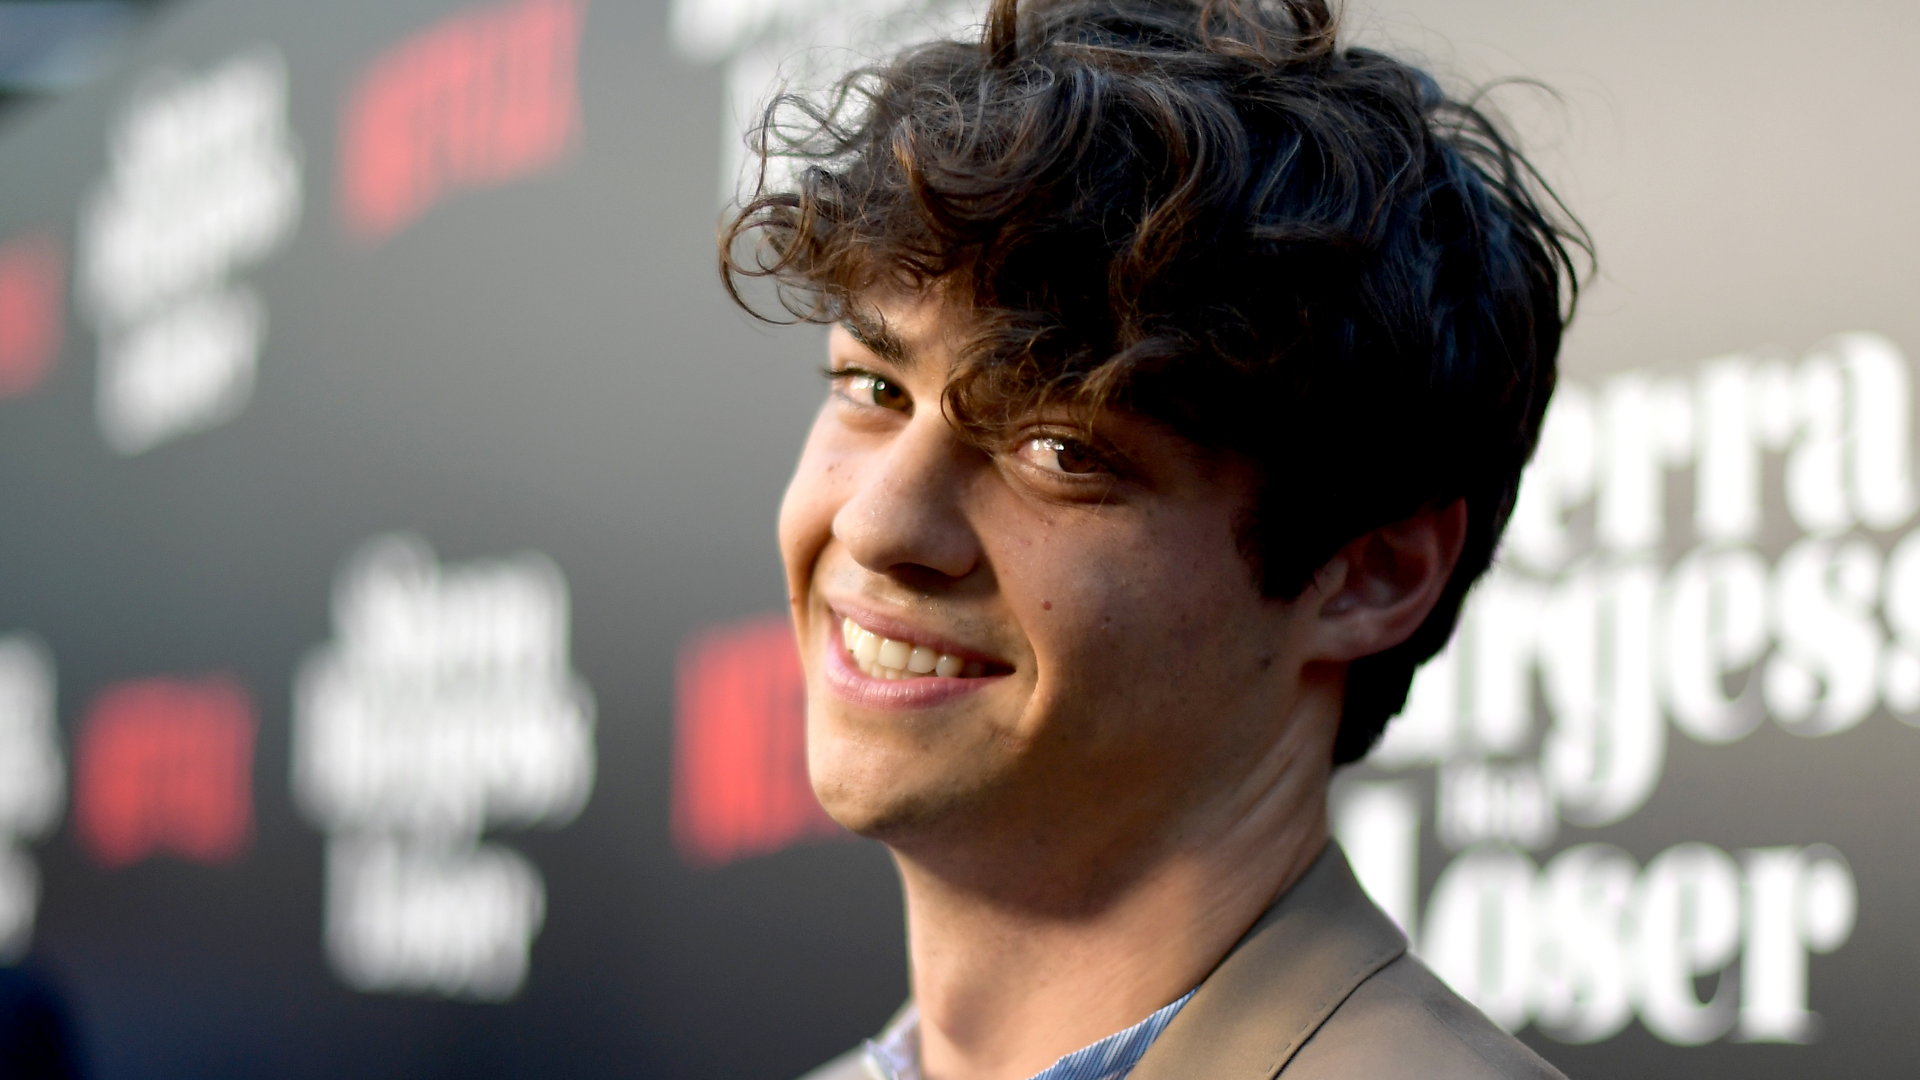 To All The Boys Star Noah Centineo Reveals New Look Photos